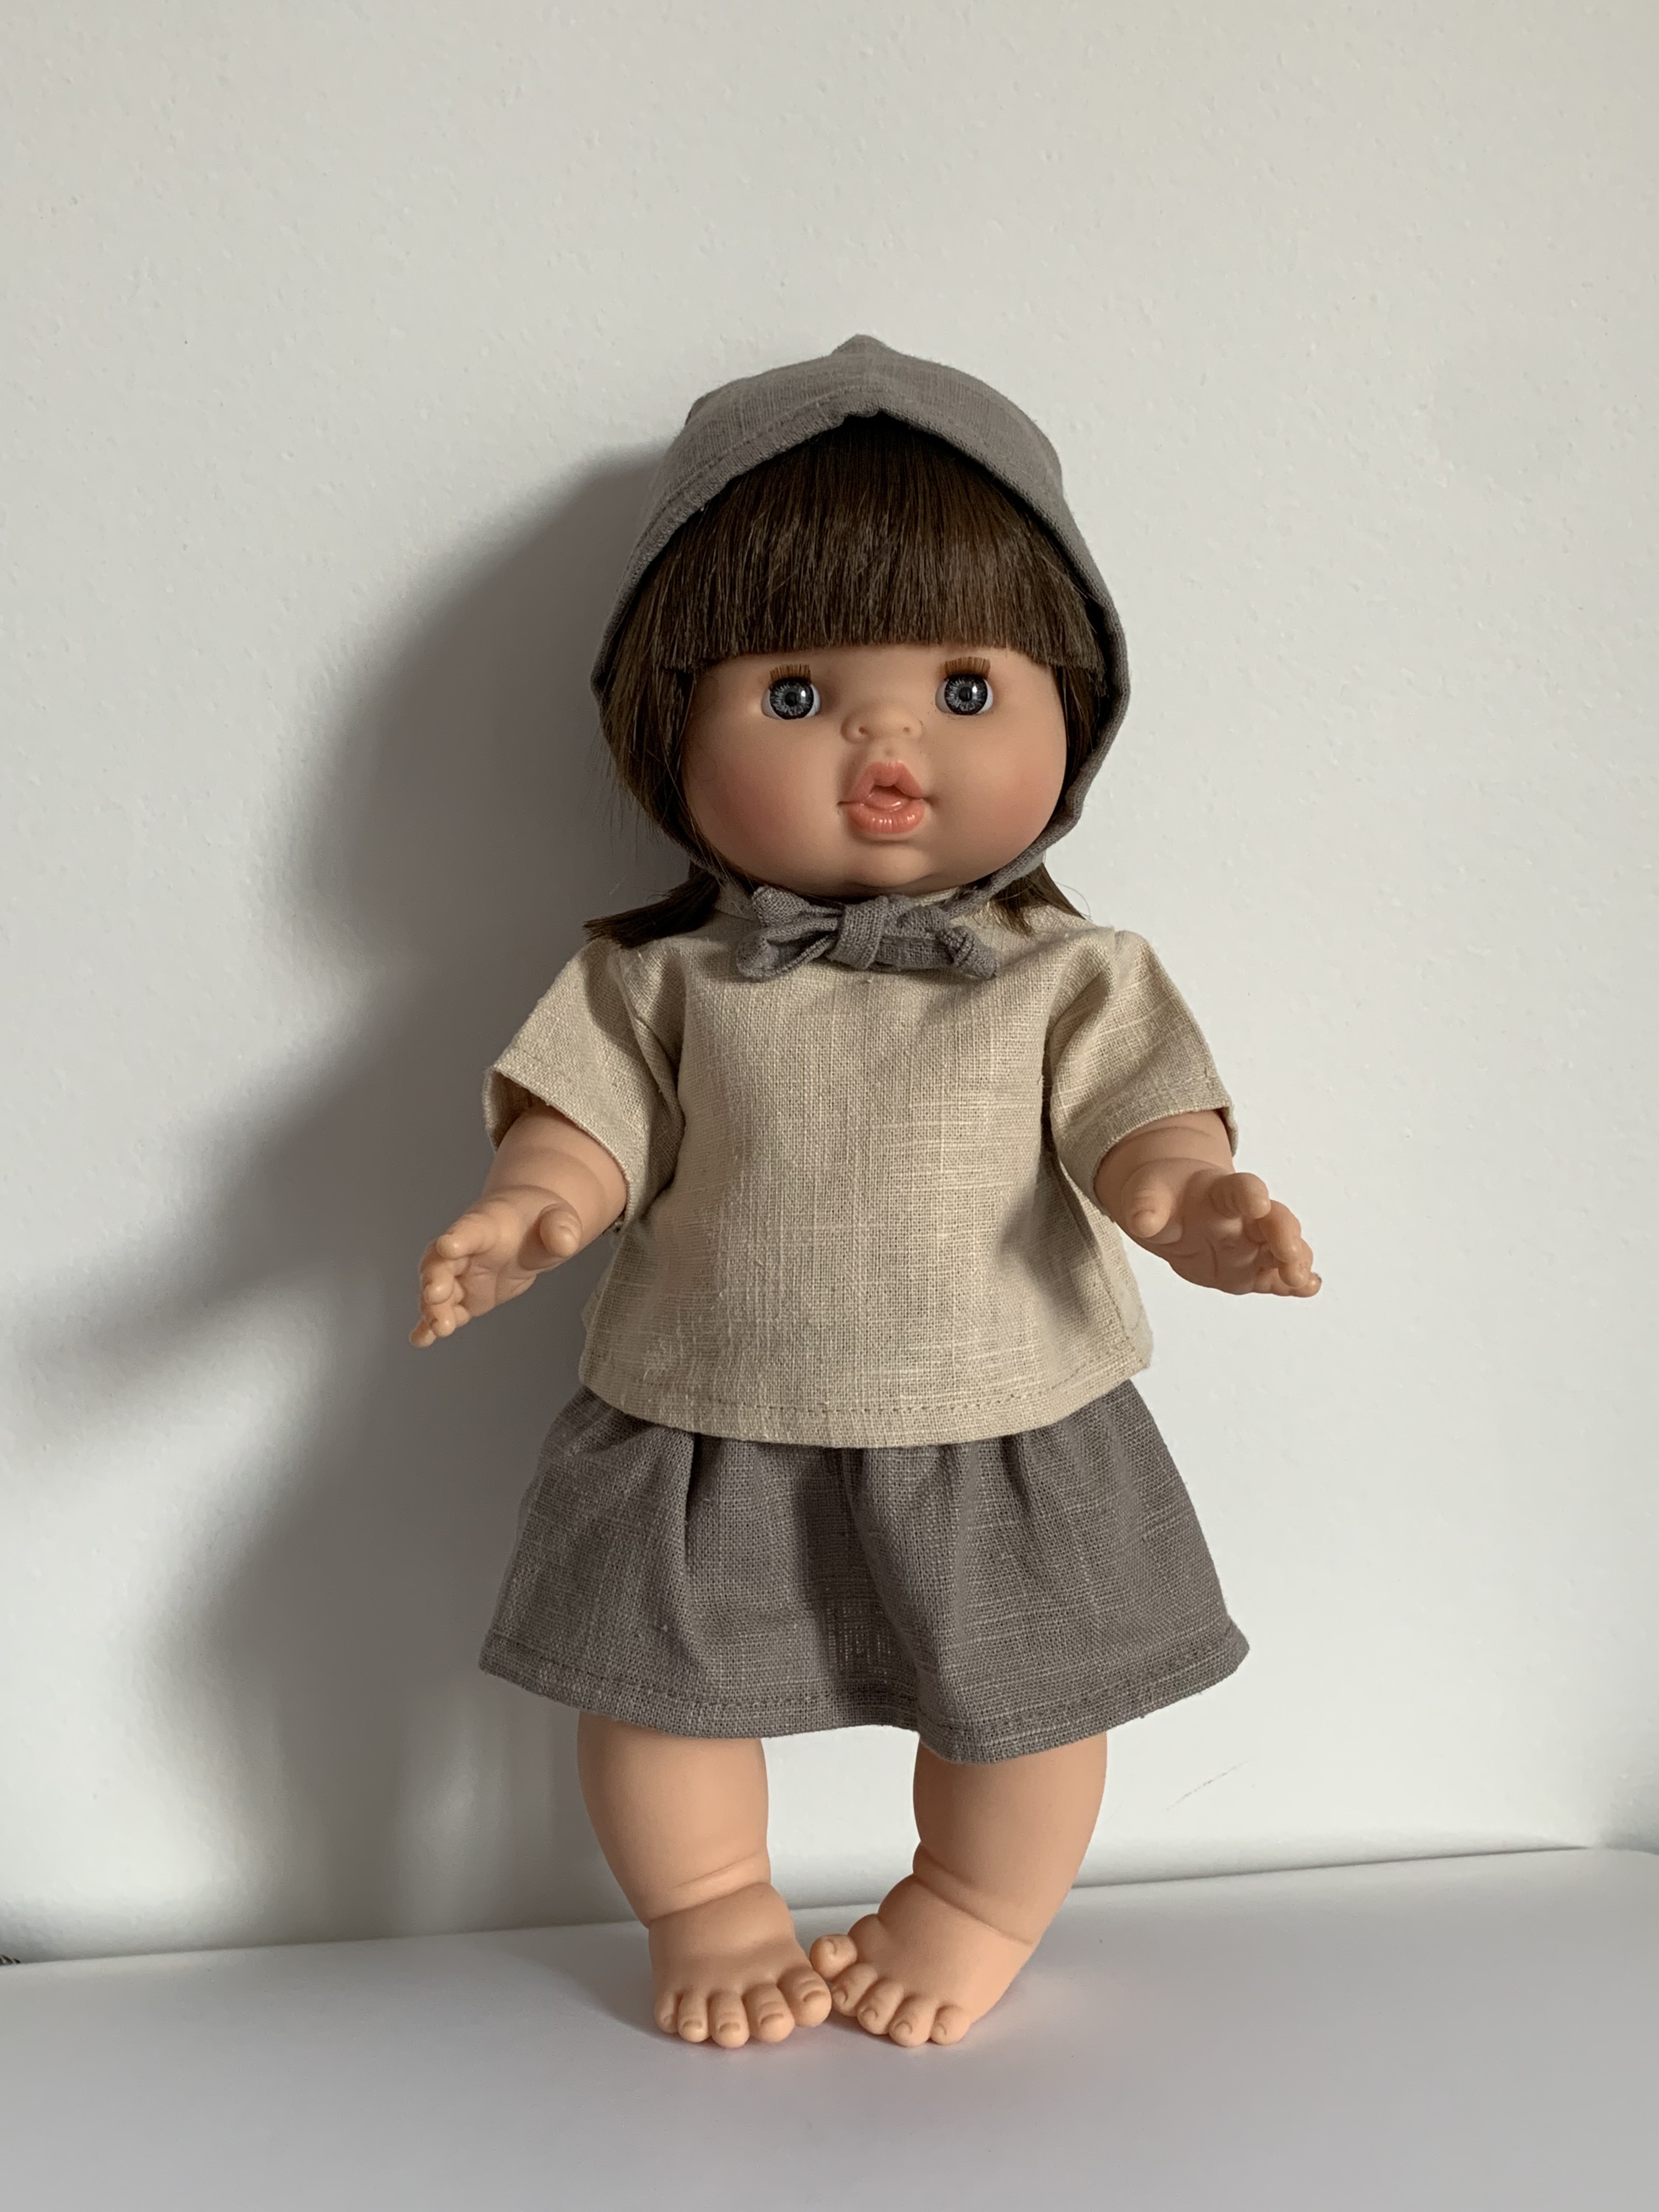 Minikane Chloe Paola Reina Doll with Her Pretty Linen Outfit